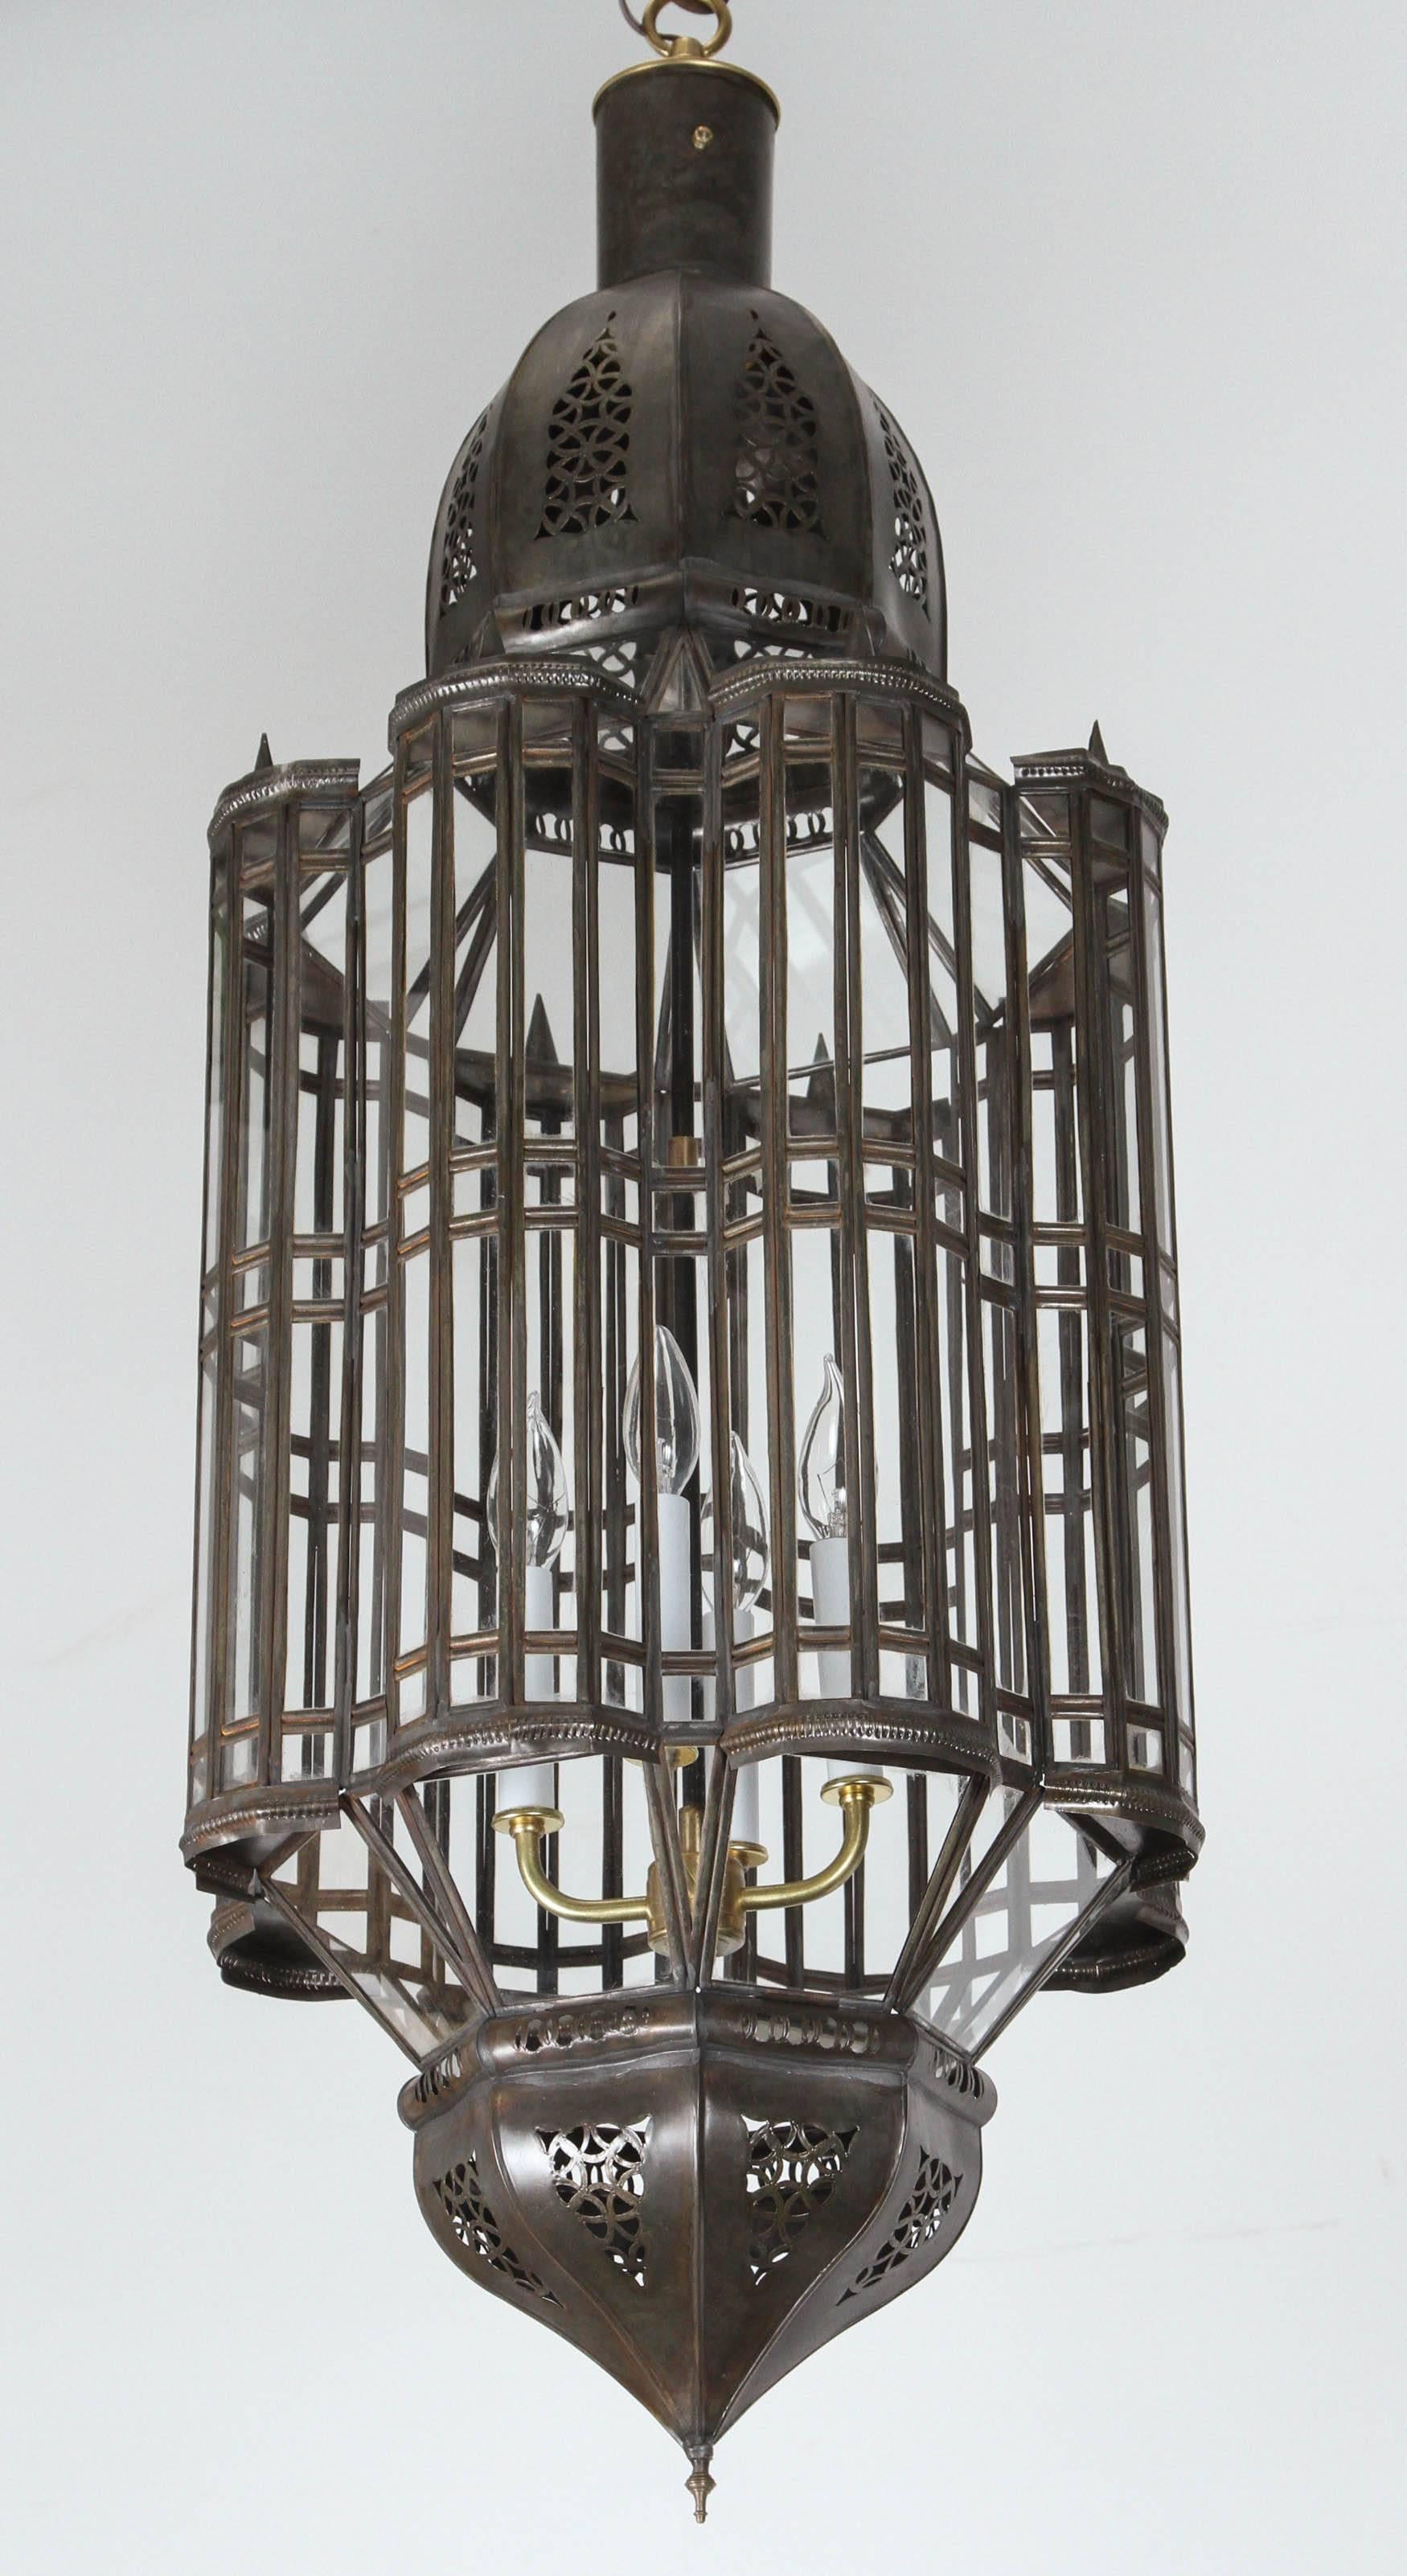 Large-scale Moroccan, Moorish style chandelier.
Metal and clear glass Moroccan light fixture, wired with a cluster of three lights.
Comes with chains and canopy ready to install, chains could be adjusted to your needs.
Glass body height: 44 in.